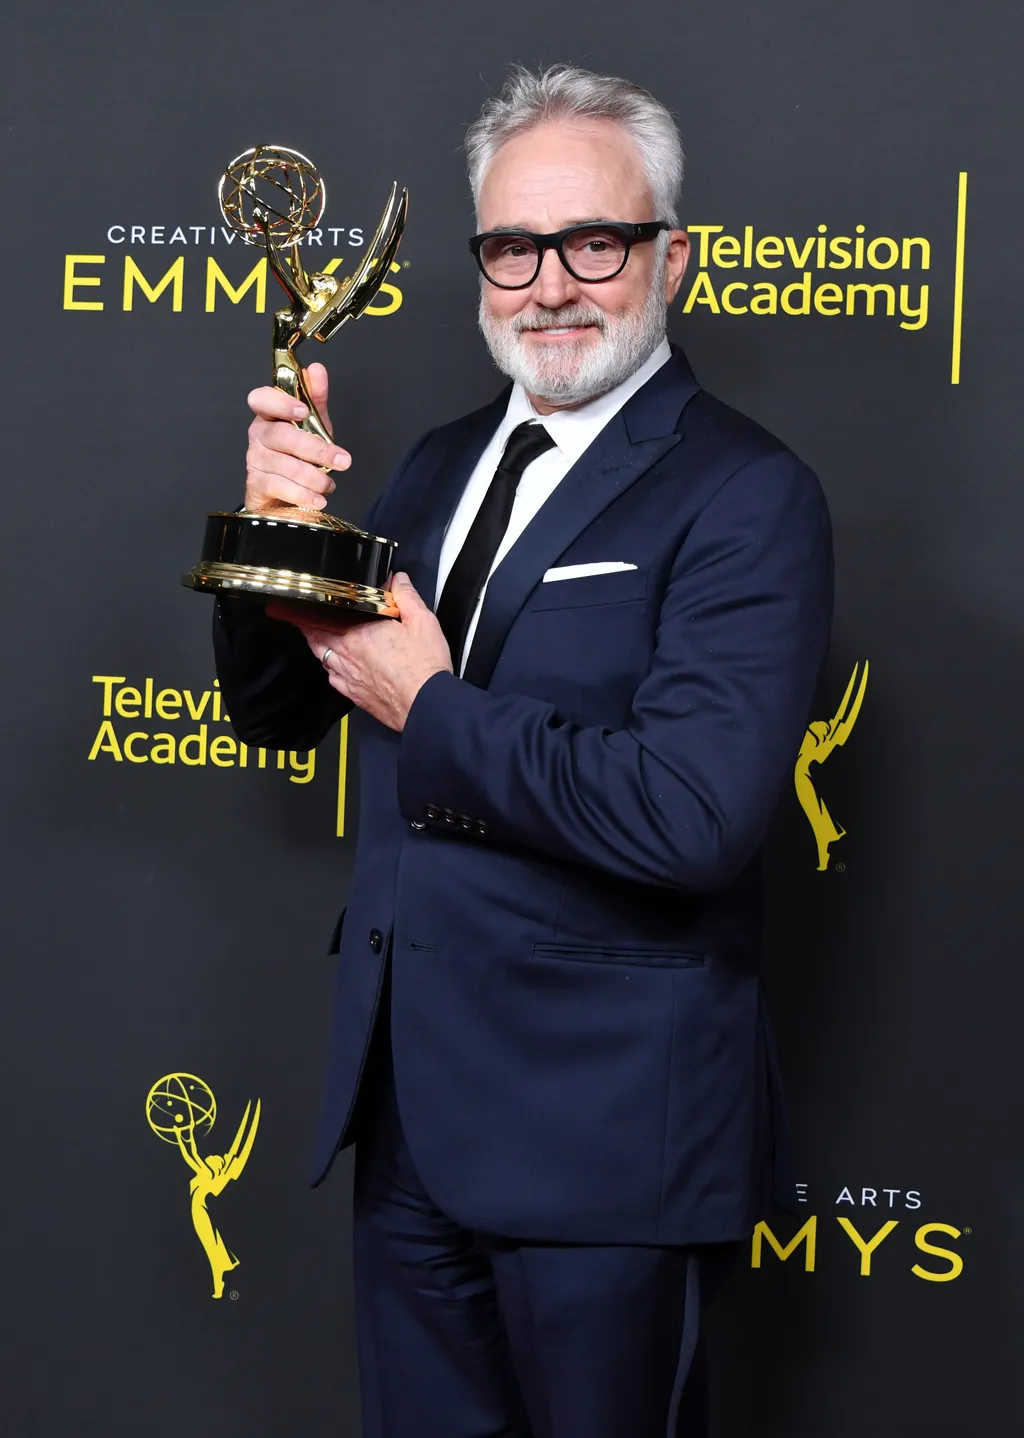 2019 Creative Arts Emmy Awards - Photo Room GettyImageRank2 arts culture and entertainment 